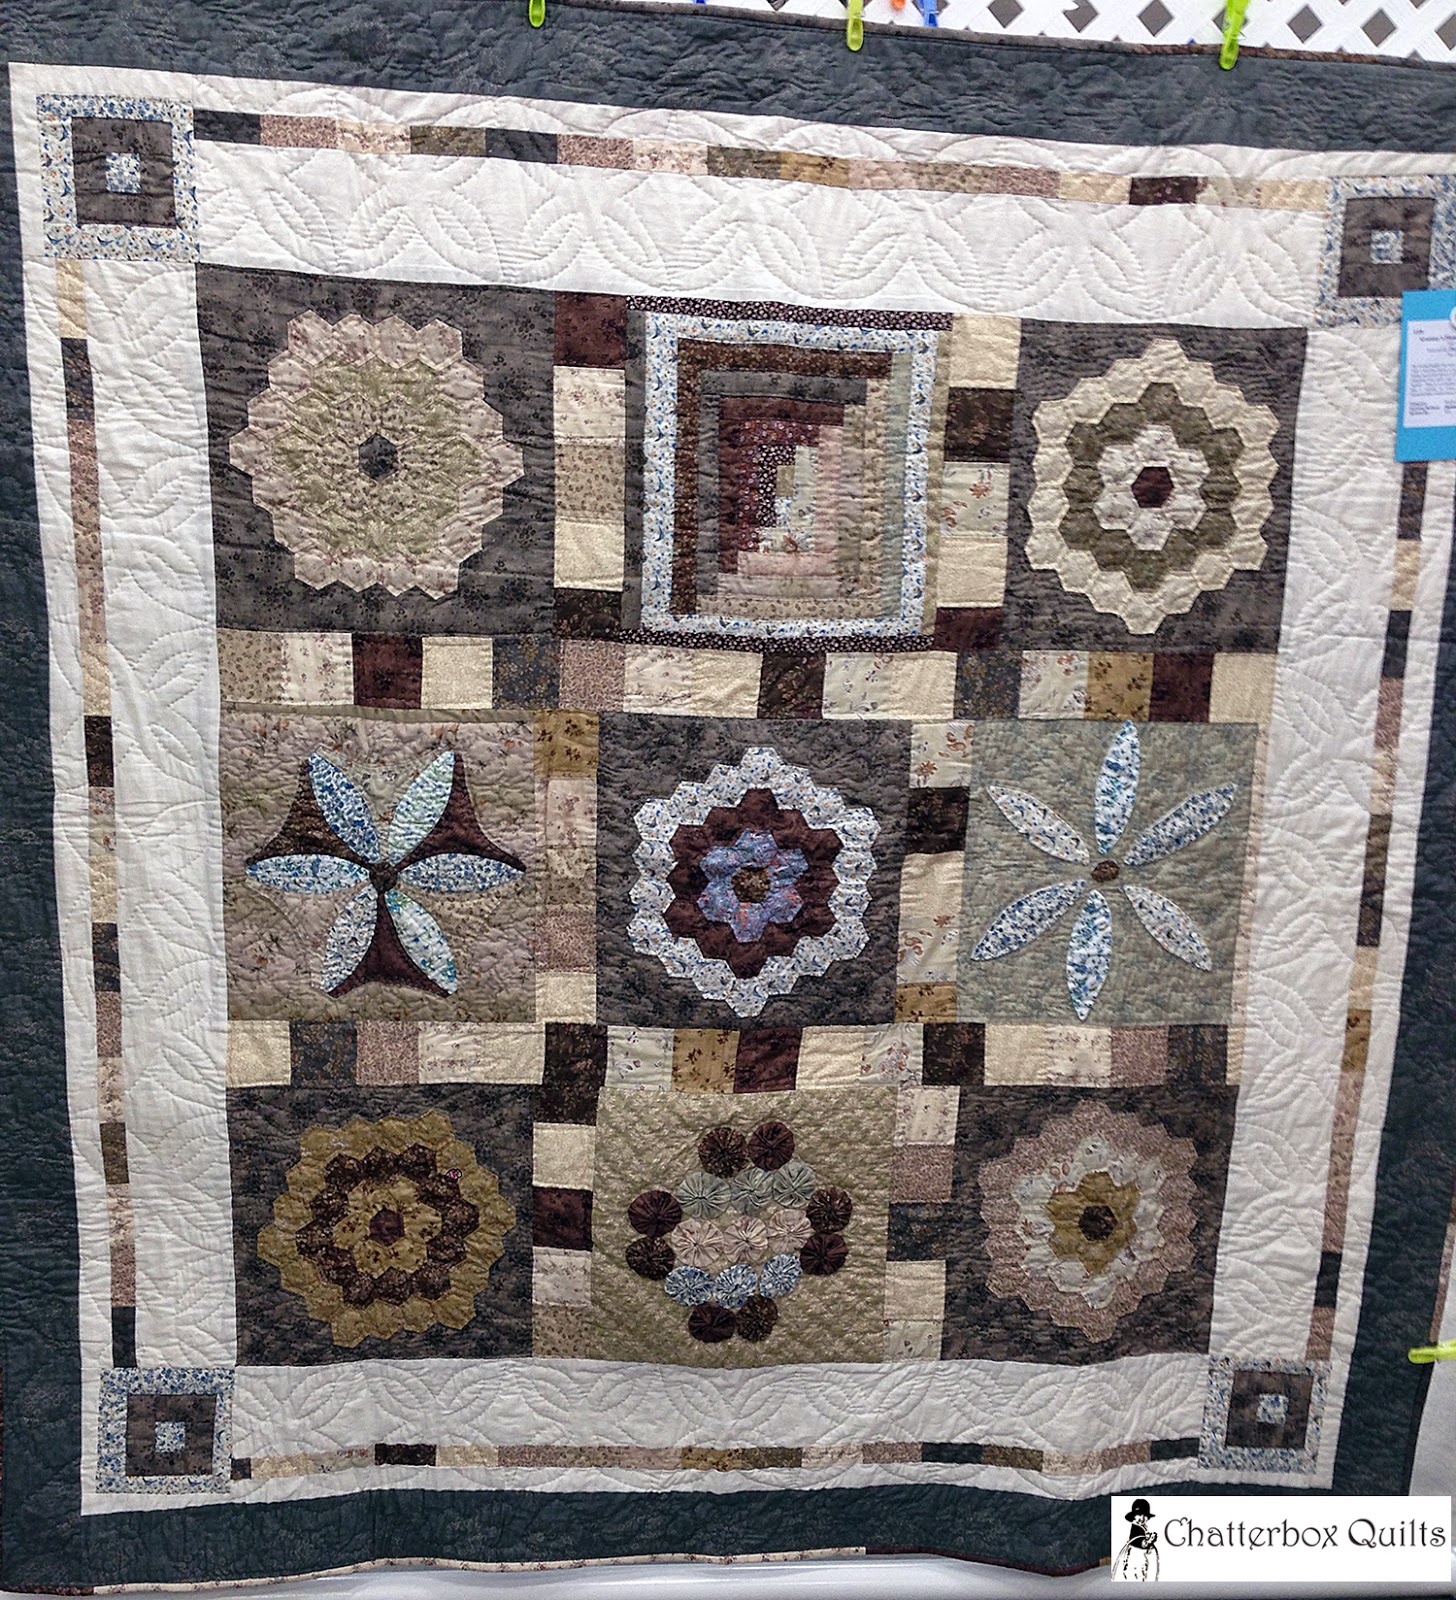 Books — Chatterbox Quilts' Blog - Chatterbox Quilts